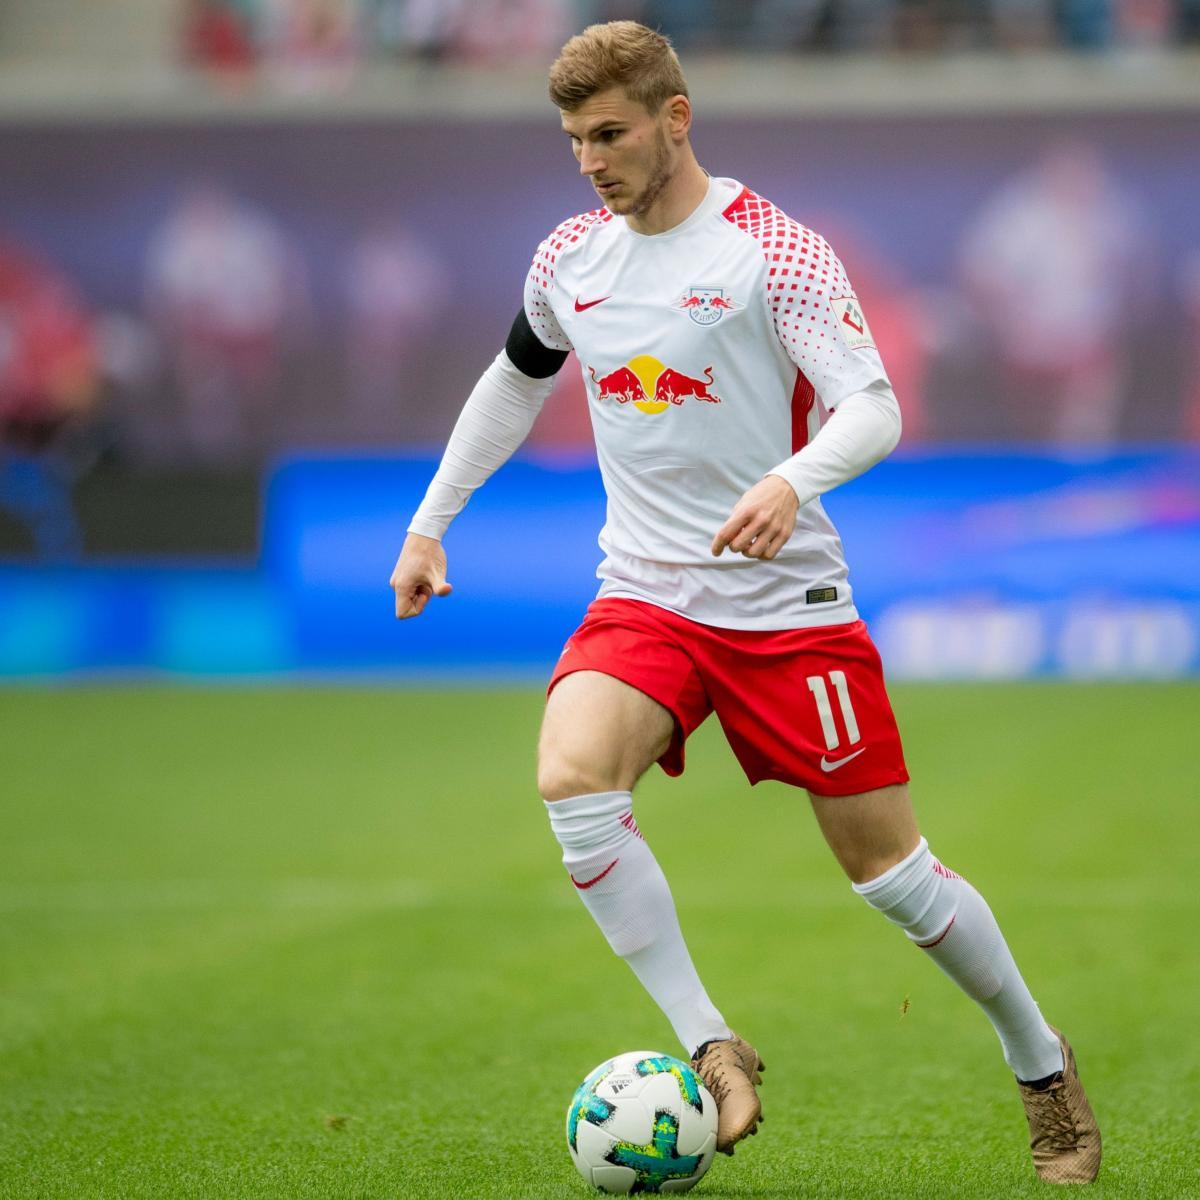 Manchester United Transfer News: Timo Werner Talks of 'Dream' to